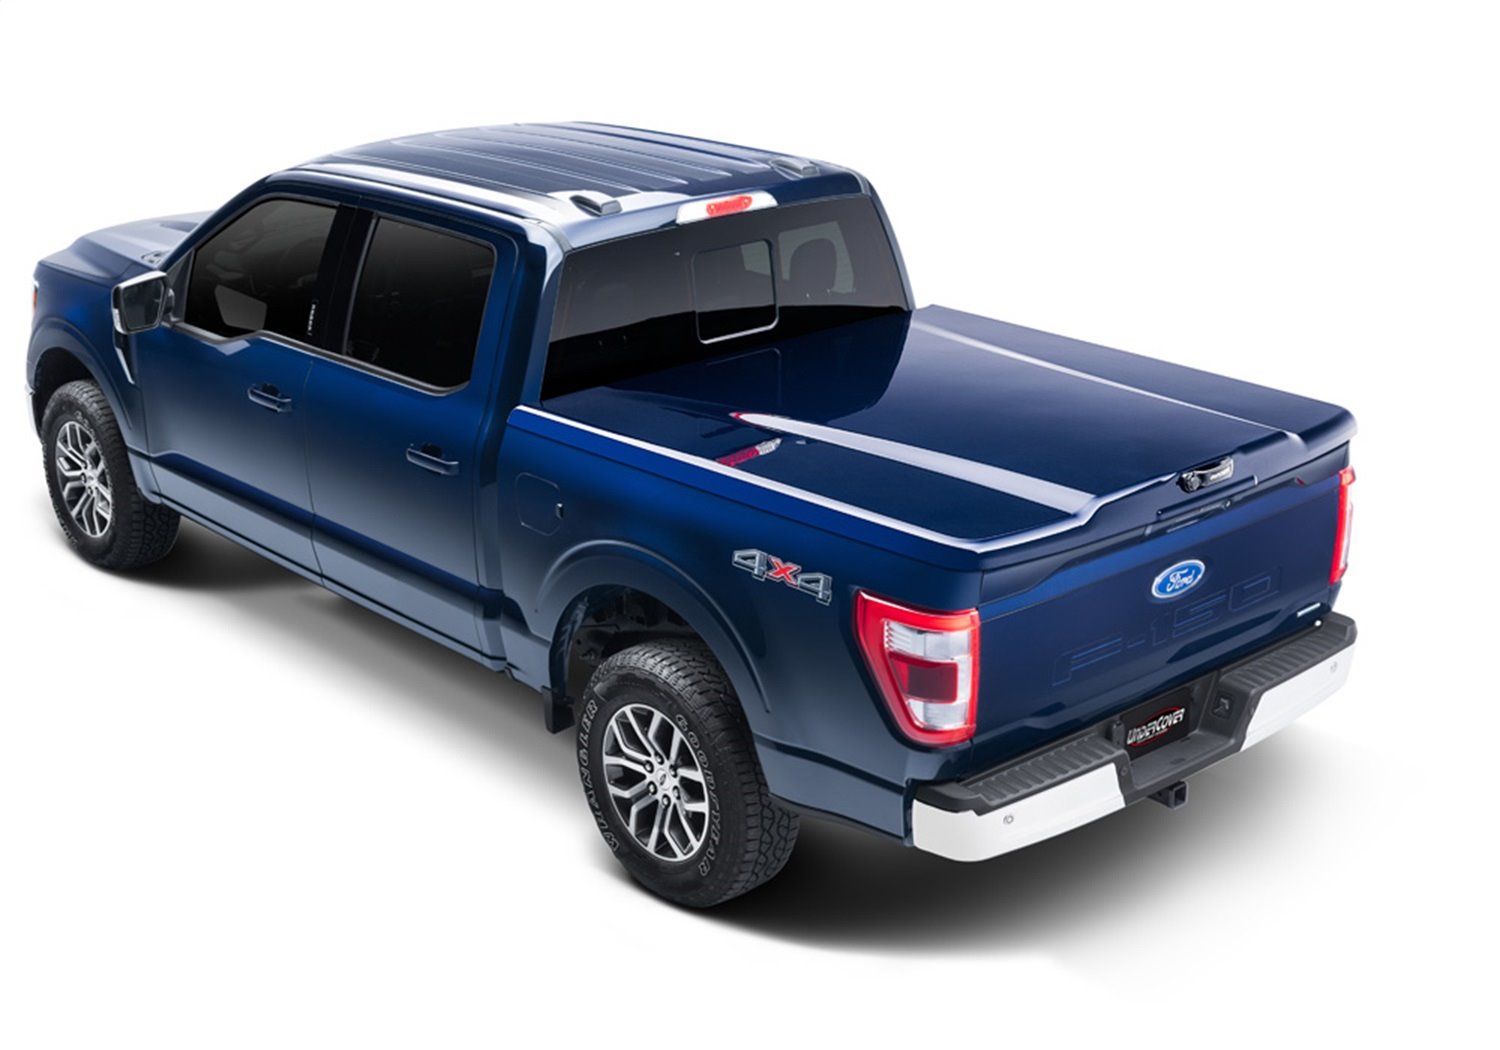 UC2208L-JS Elite LX Hard Non-Folding Cover, Fits Select Ford F-150 5'7" Bed Crew (Includes Lightning) JS Iconic Silver Metallic